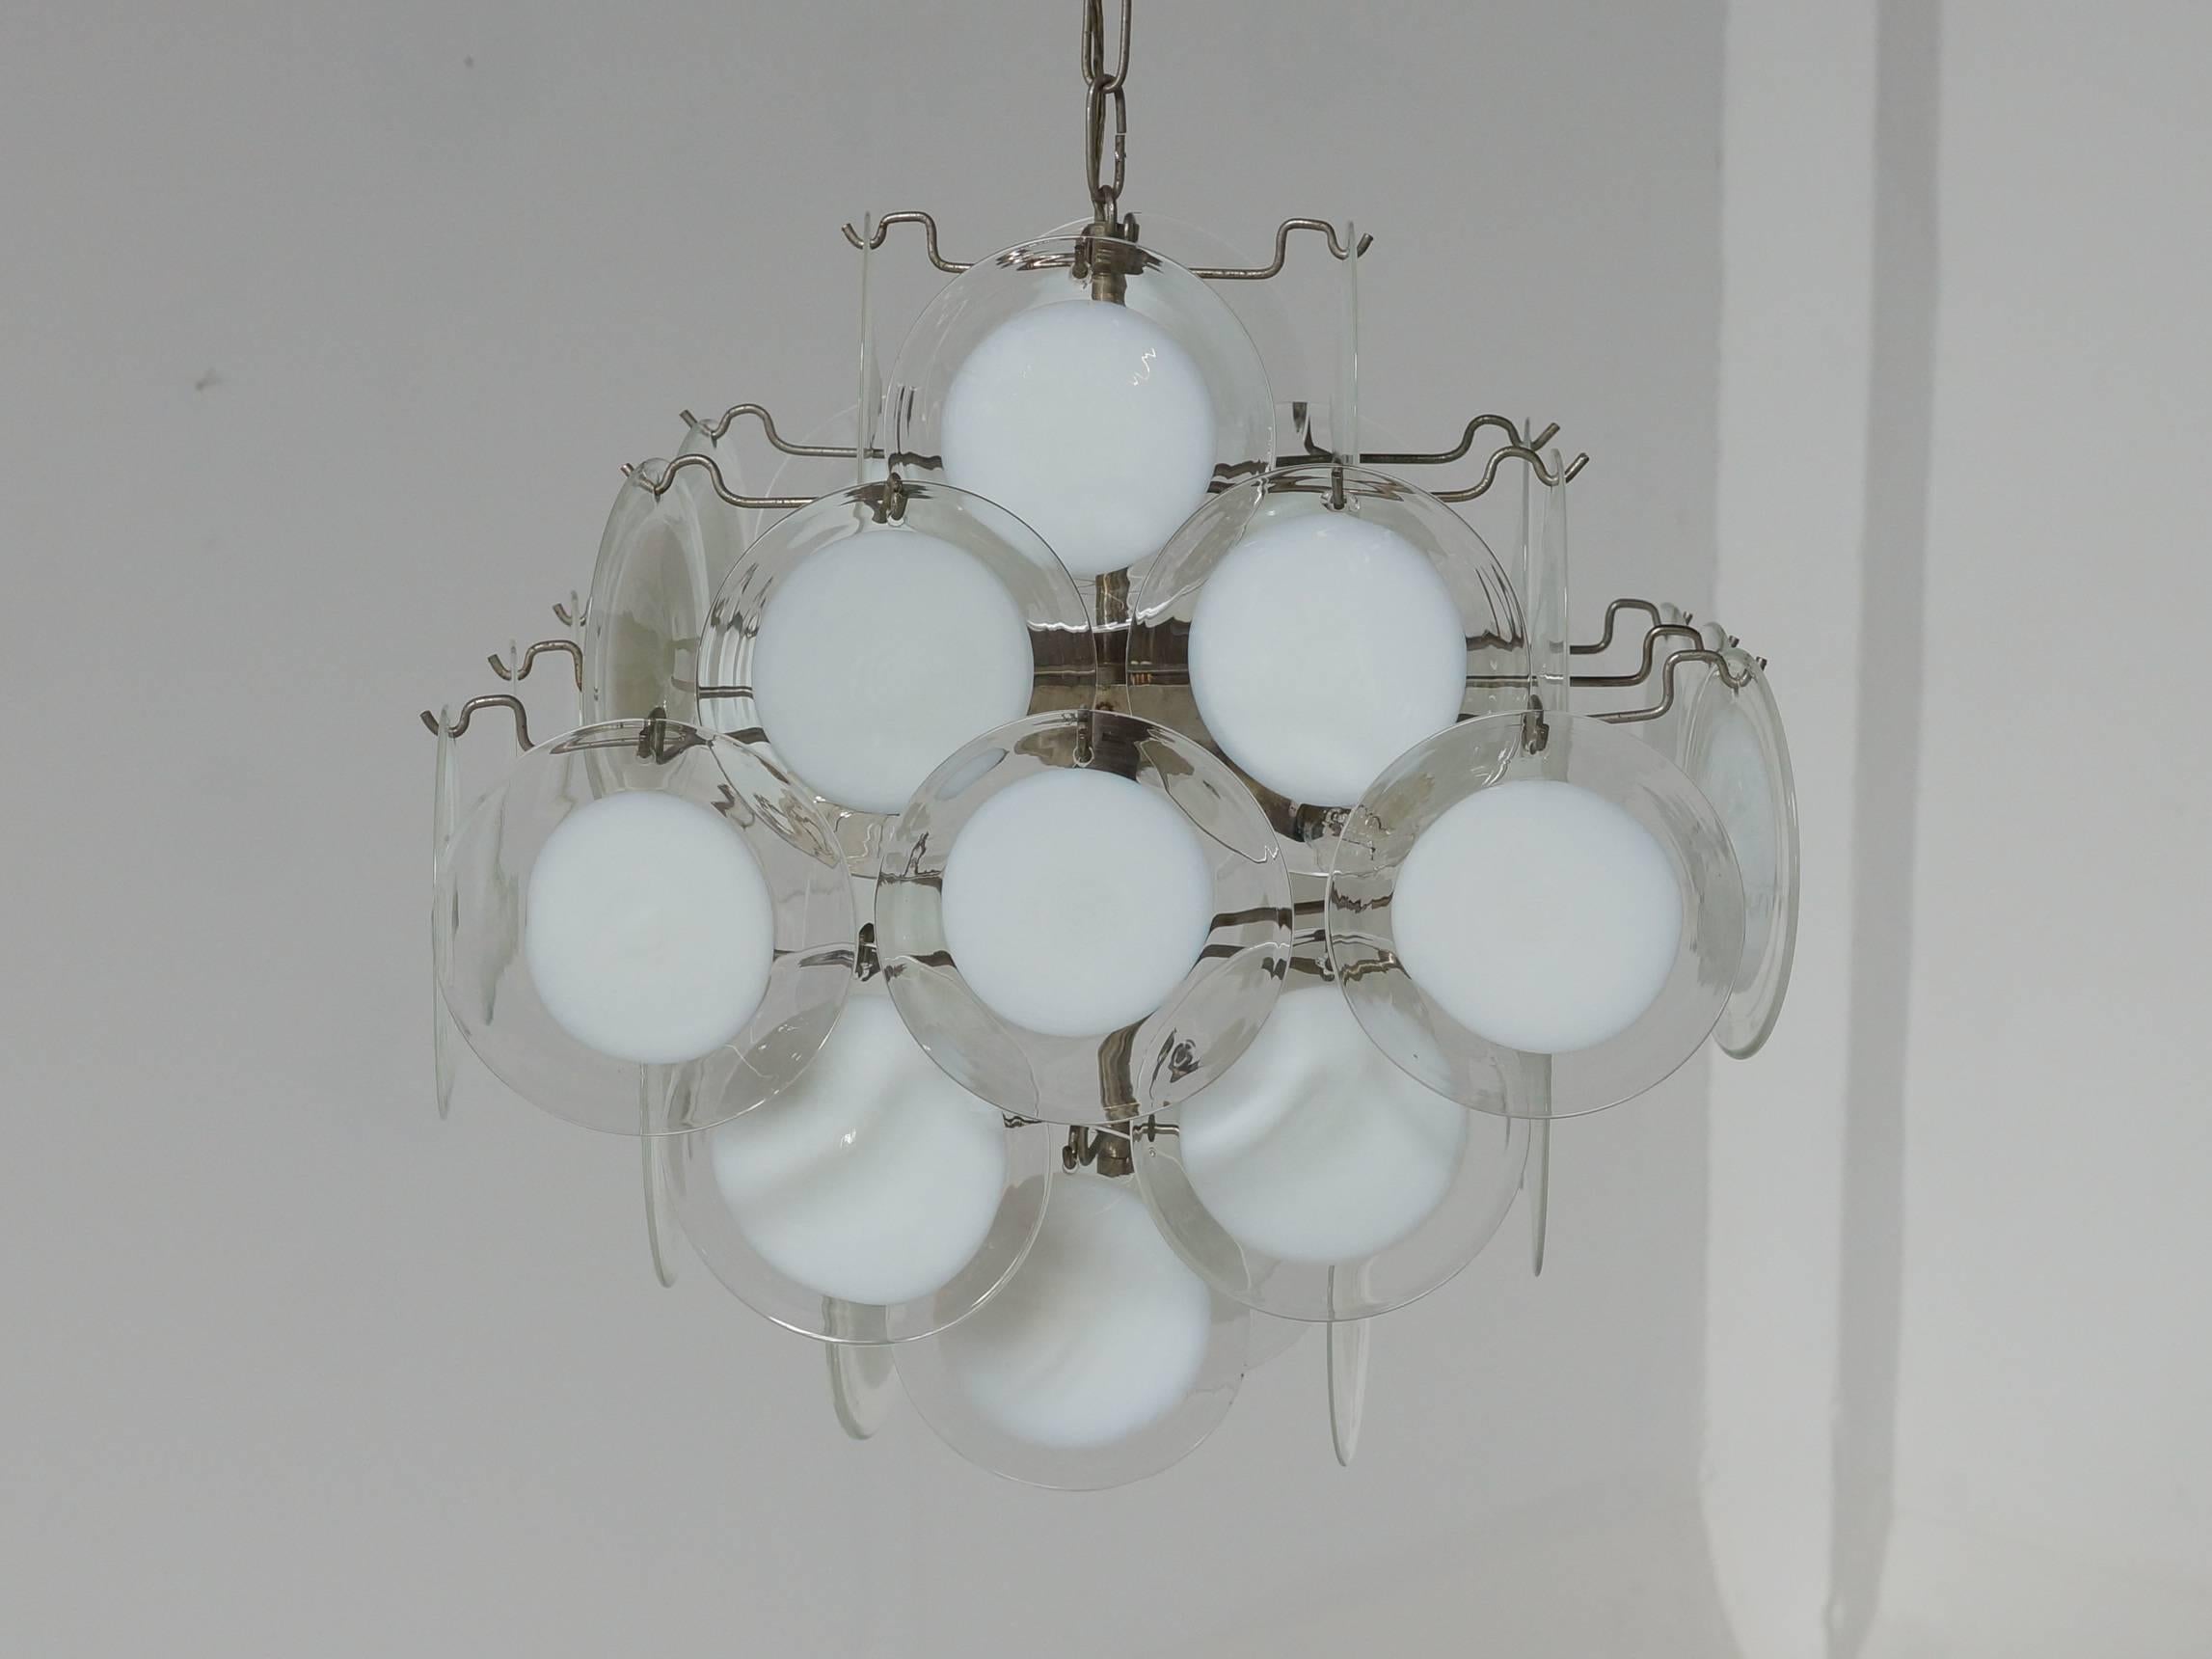 Italian Mid-Century chandelier by Vistosi. Five layers with 36 handcrafted white and clear glass discs. The chandelier lights on five small bulbs. Please feel free to contact us for extra information. Diameter 55 cm, height with chain 90 cm and